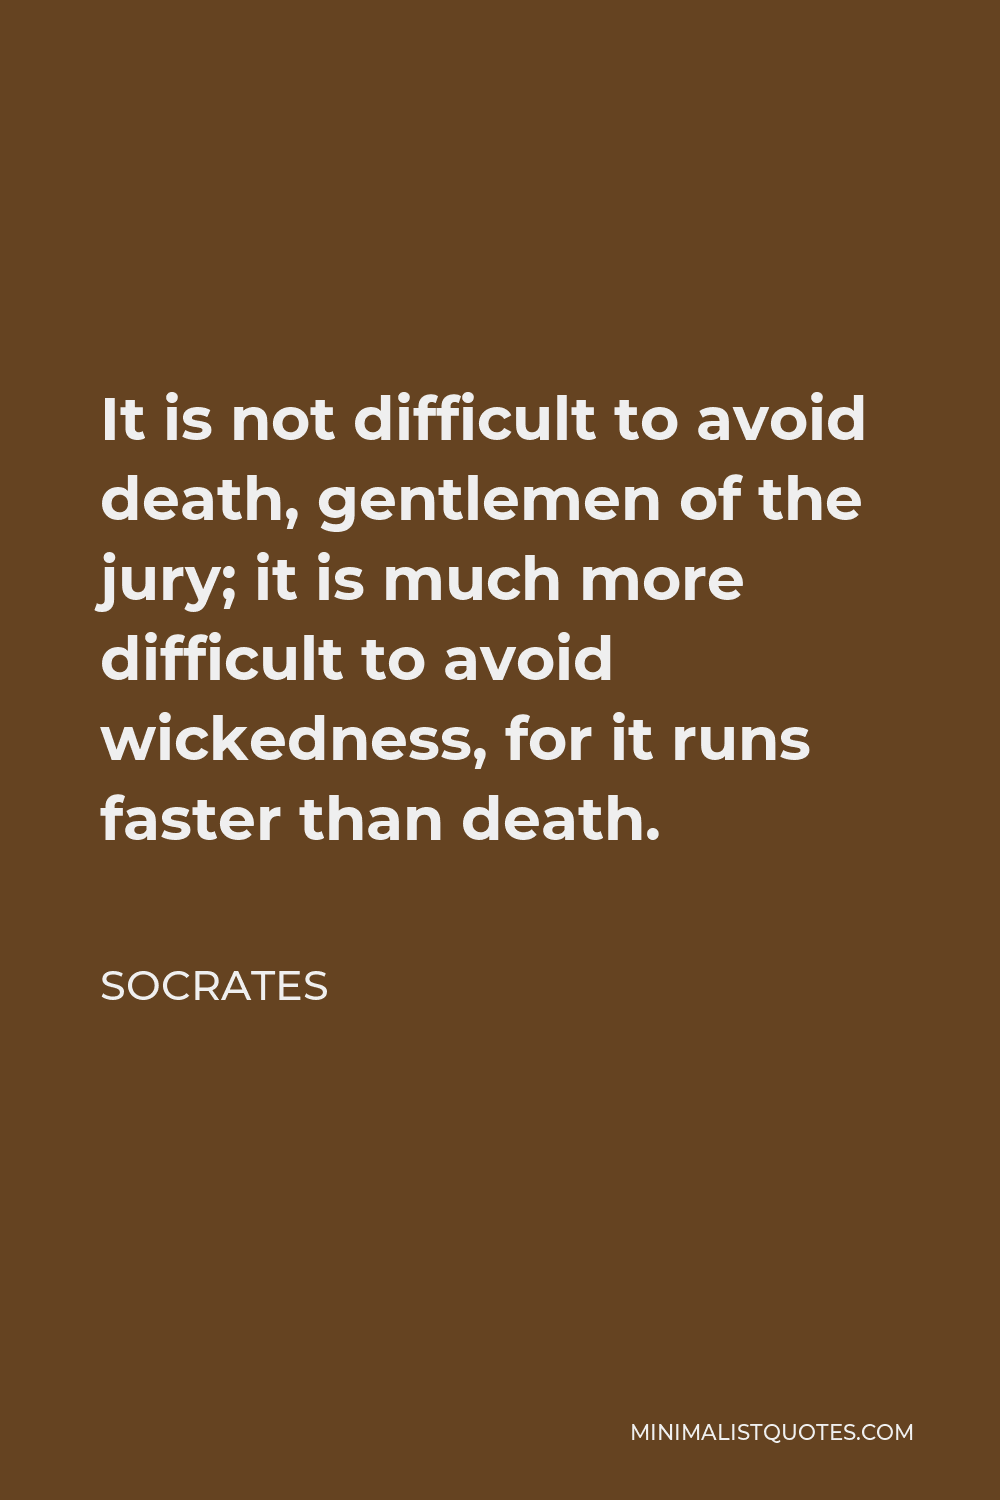 Socrates Quote - It is not difficult to avoid death, gentlemen of the jury; it is much more difficult to avoid wickedness, for it runs faster than death.